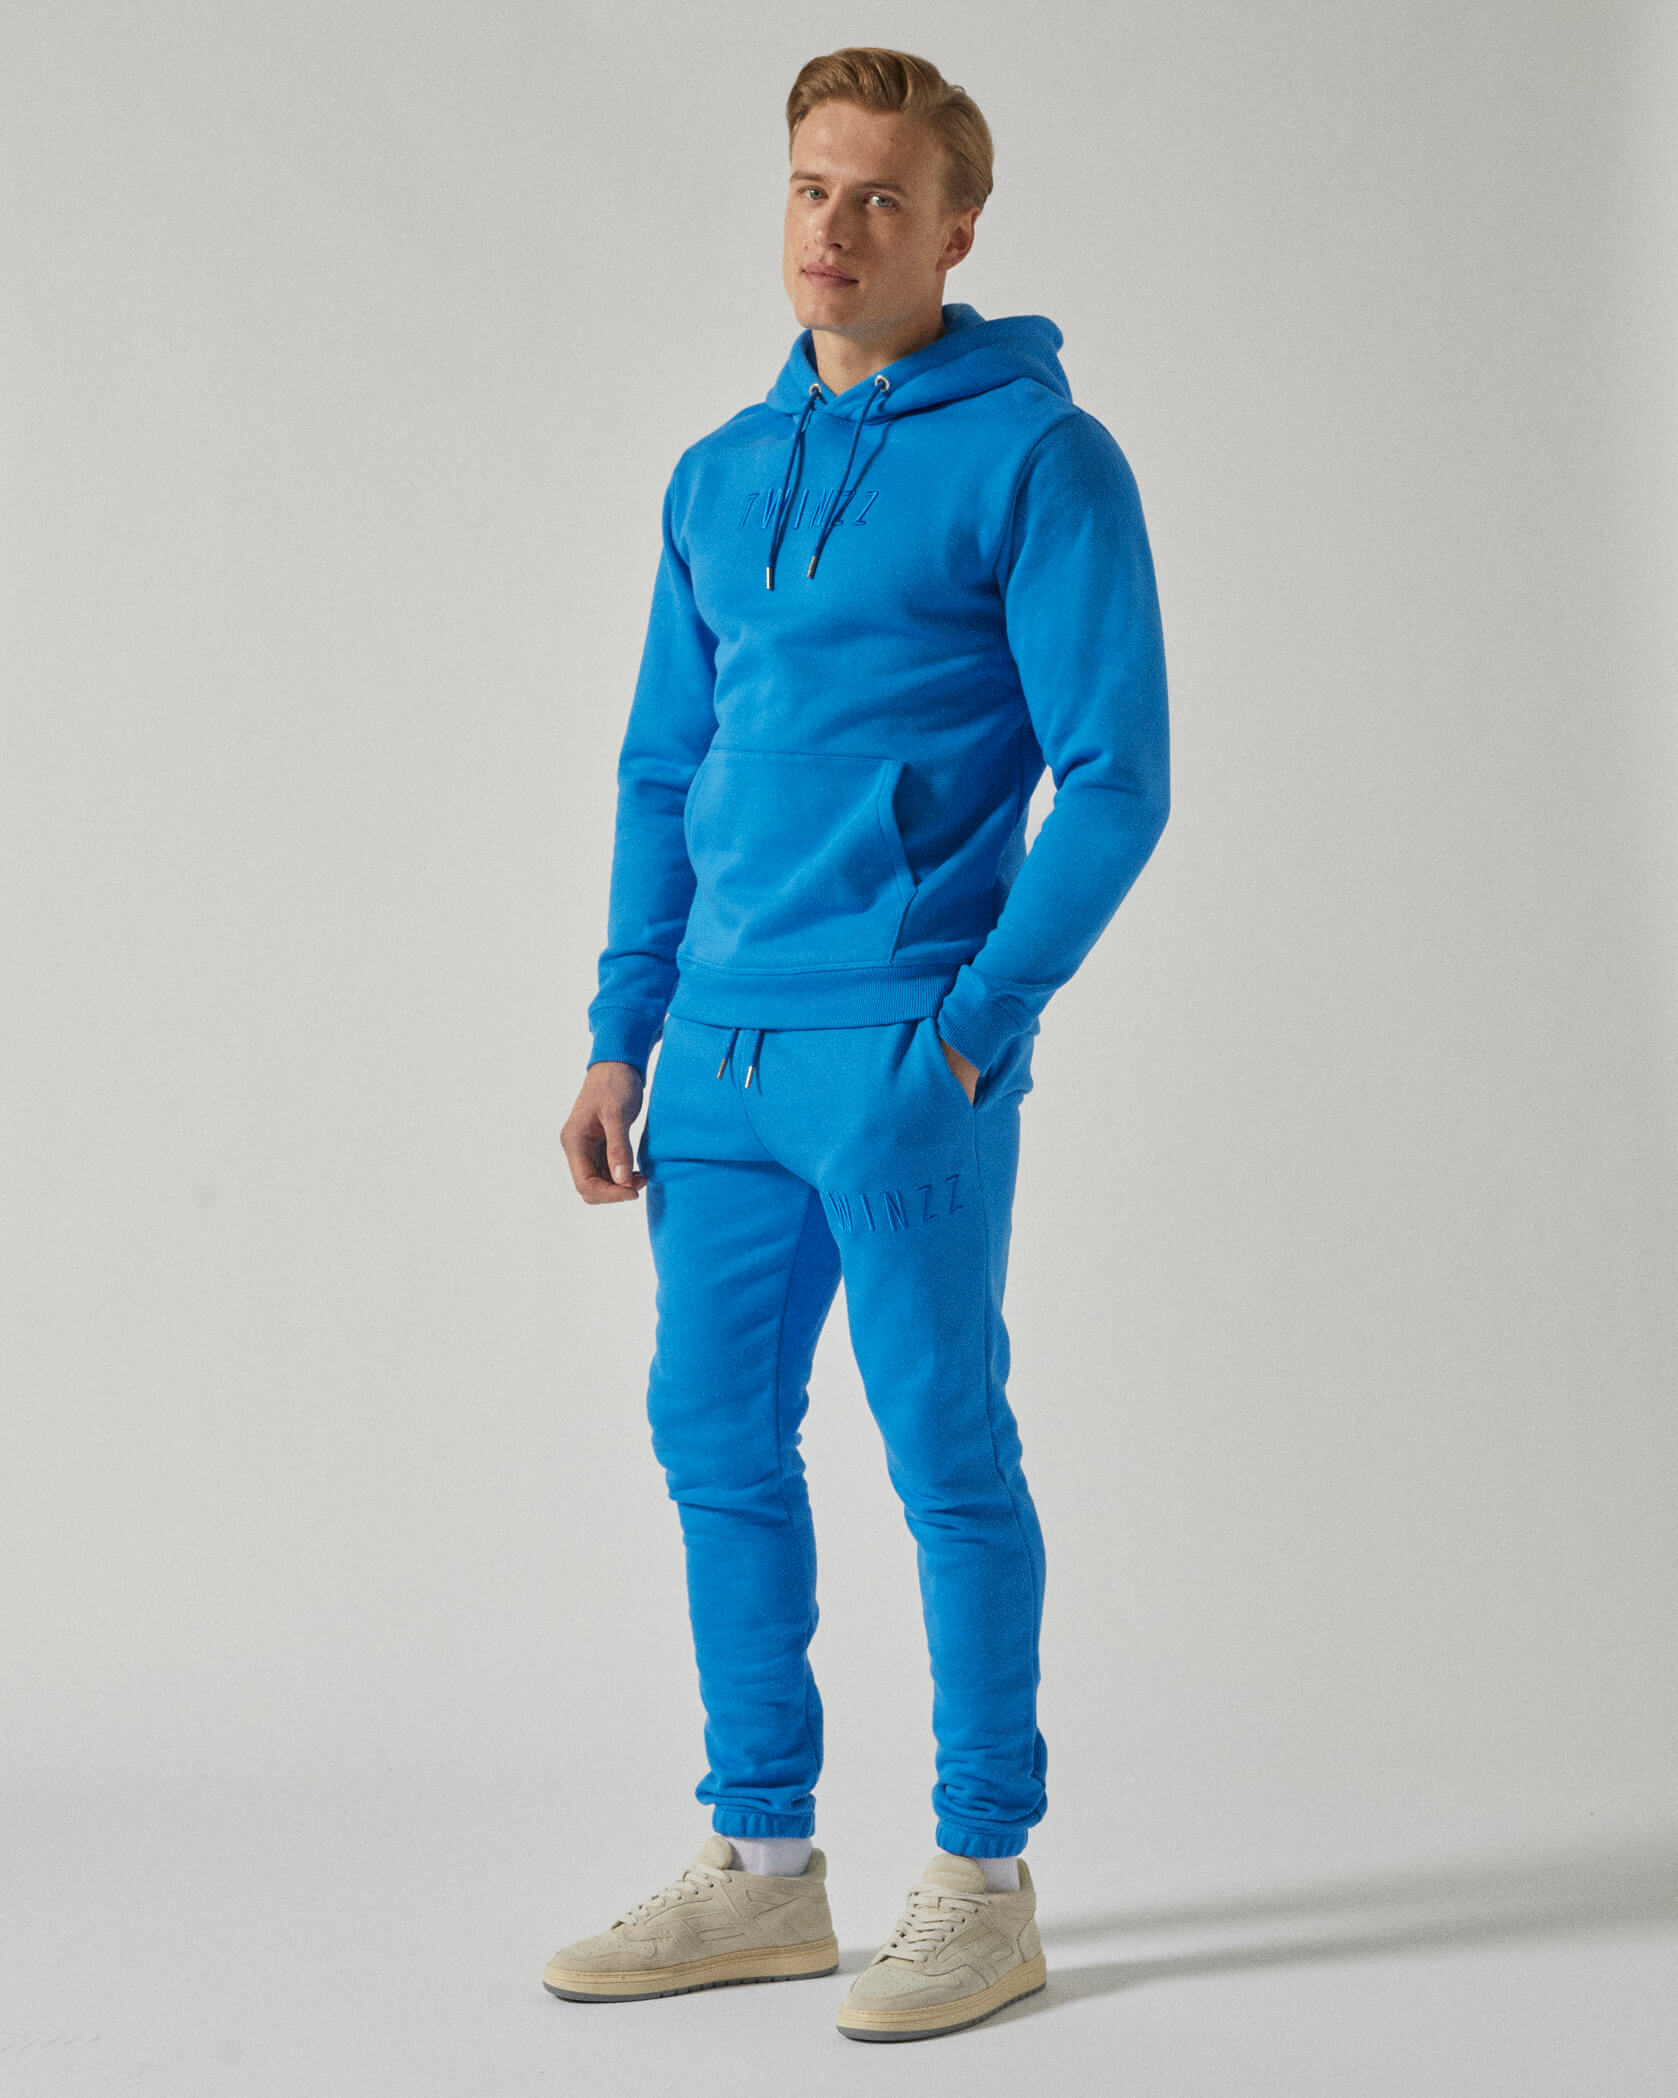 Blue Twinzz Joggers and hoodie on male model